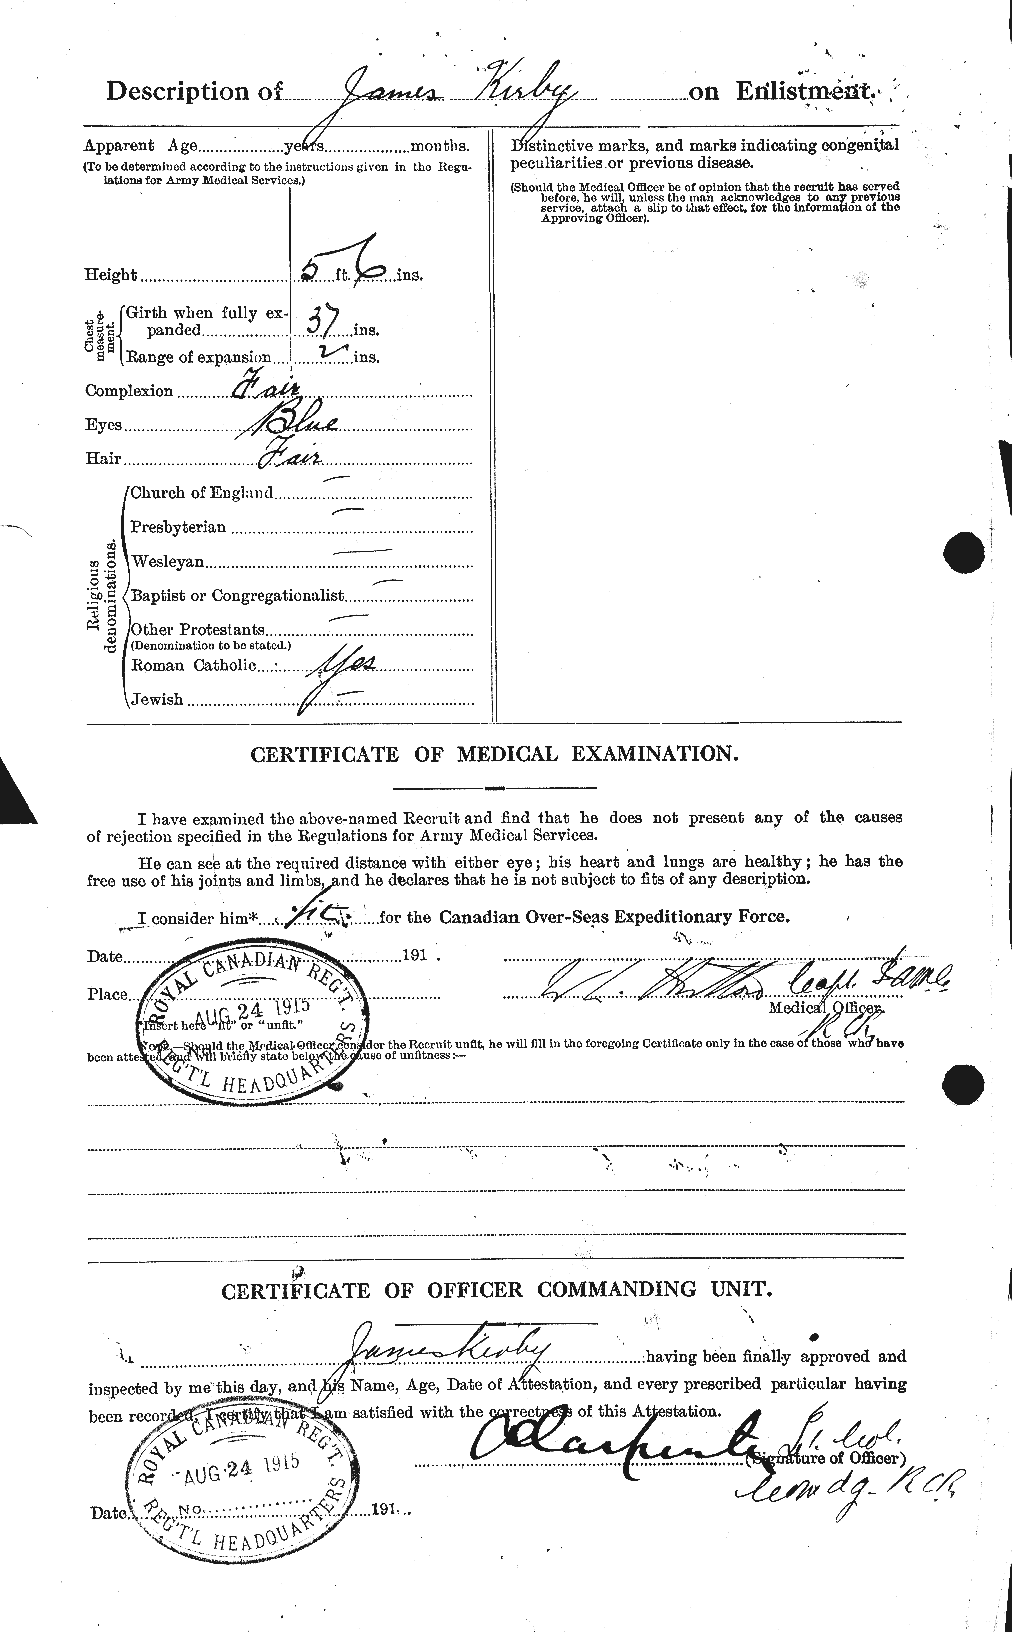 Personnel Records of the First World War - CEF 437217b